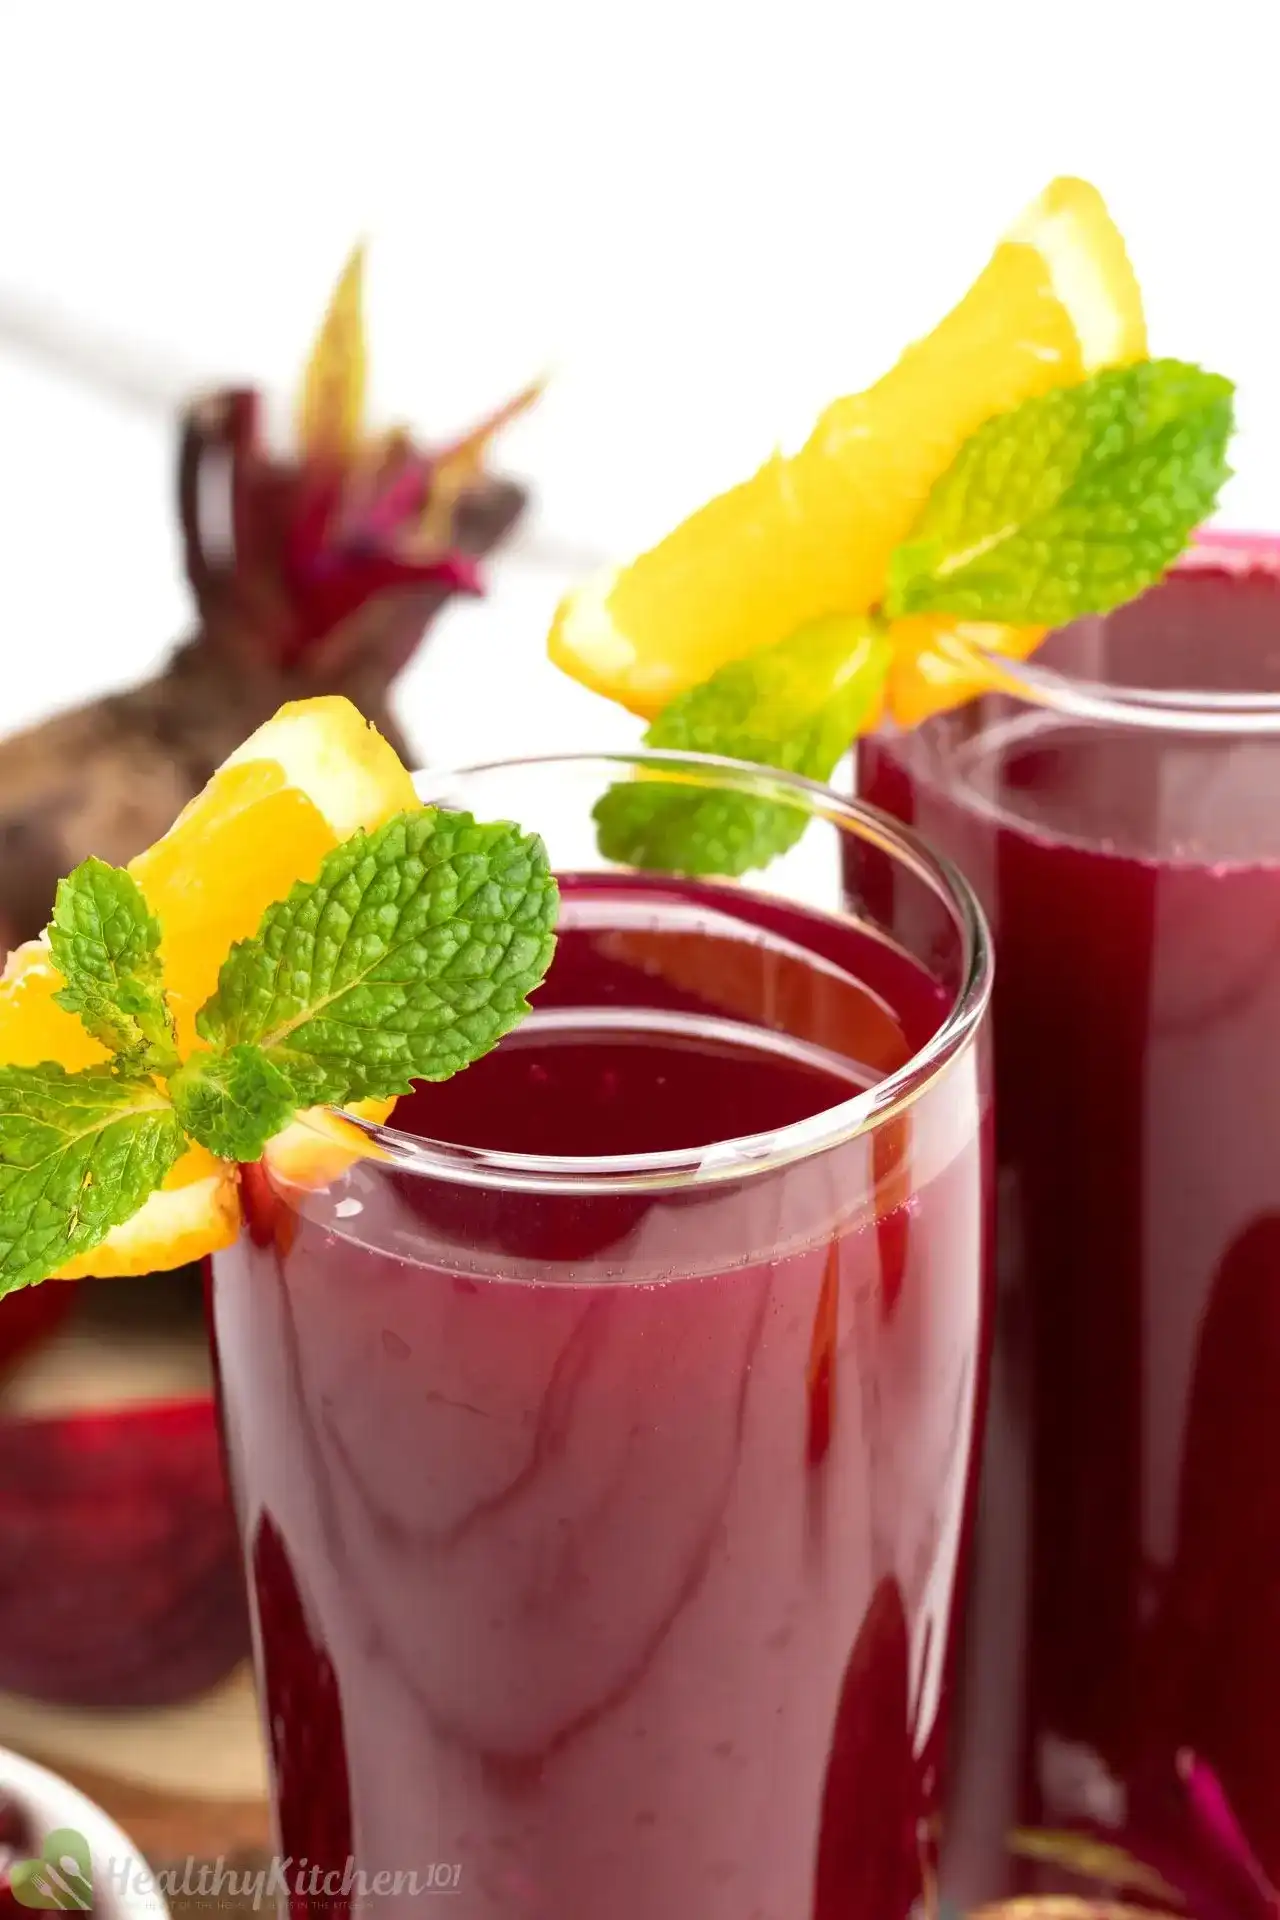 Beets Juice (Beetroot Juice) - Smell the Mint Leaves